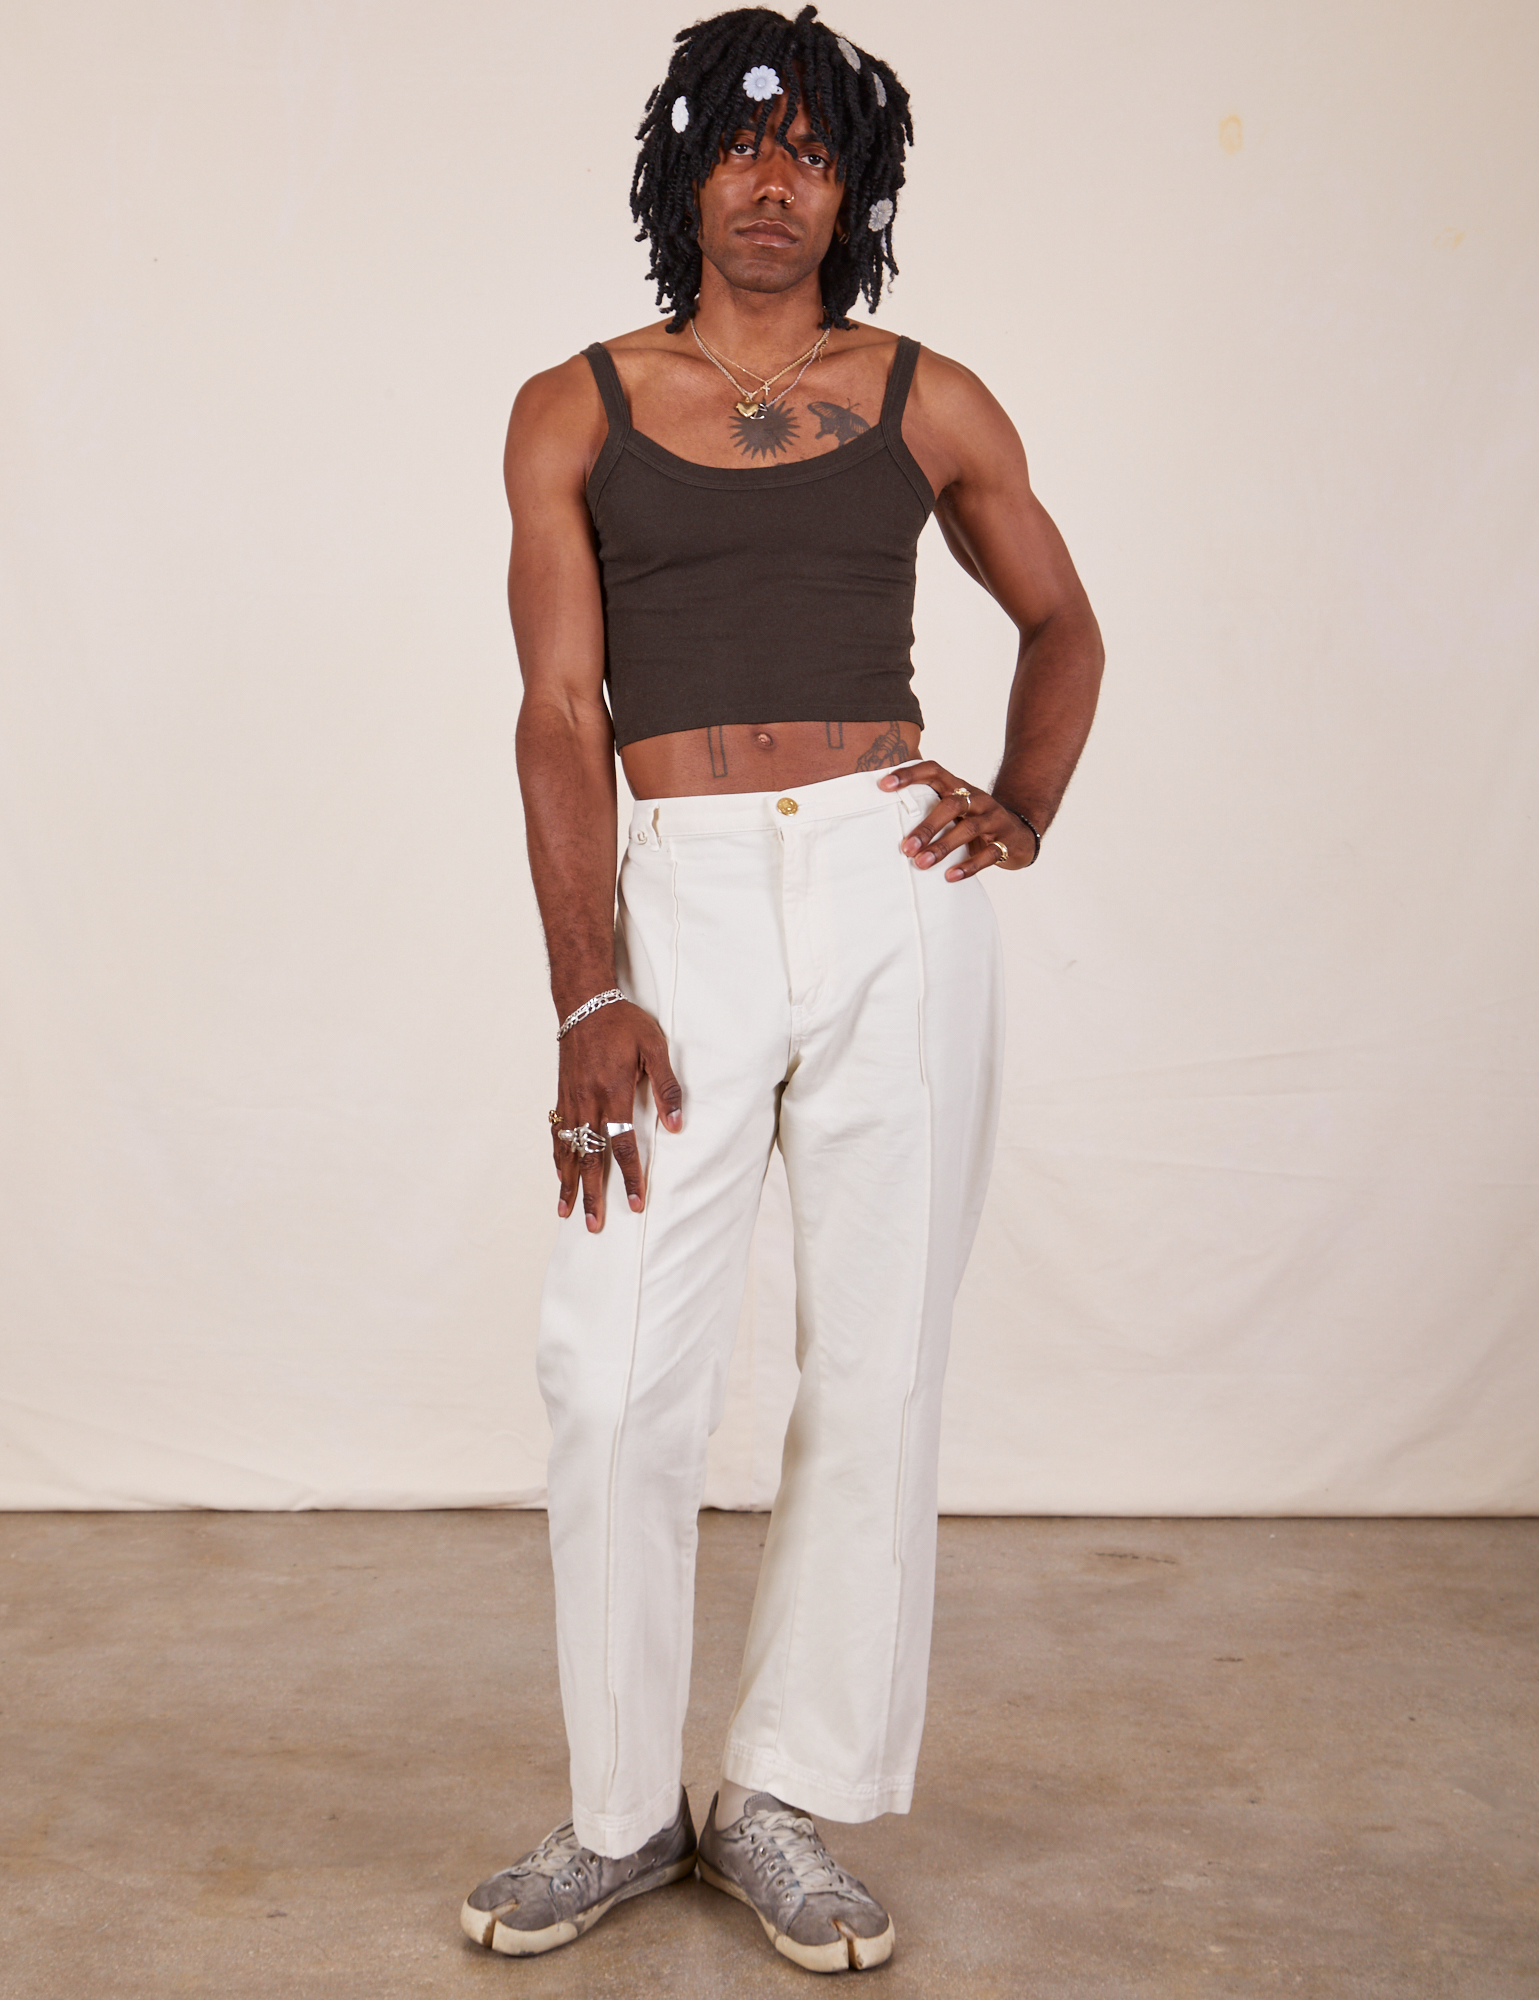 Jerrod is wearing Cropped Cami in Espresso Brown and vintage tee off-white Western Pants